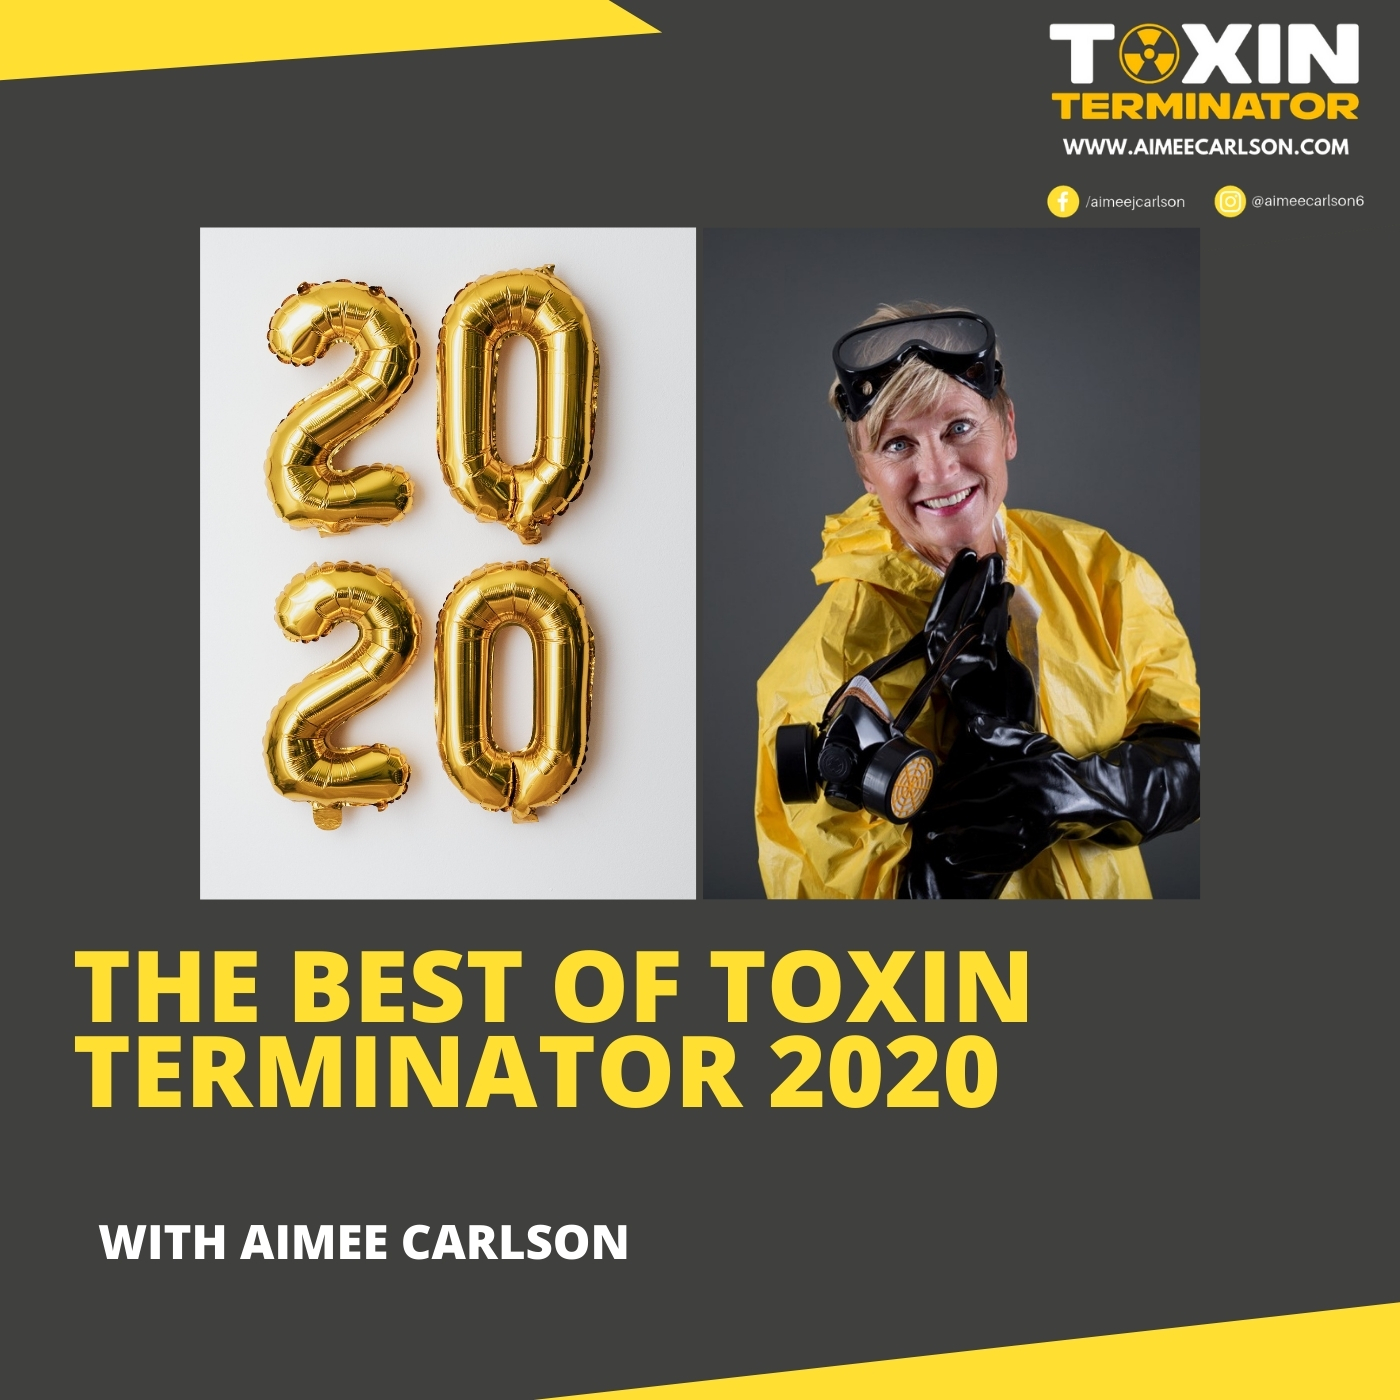 The Best of Toxin Terminator 2020